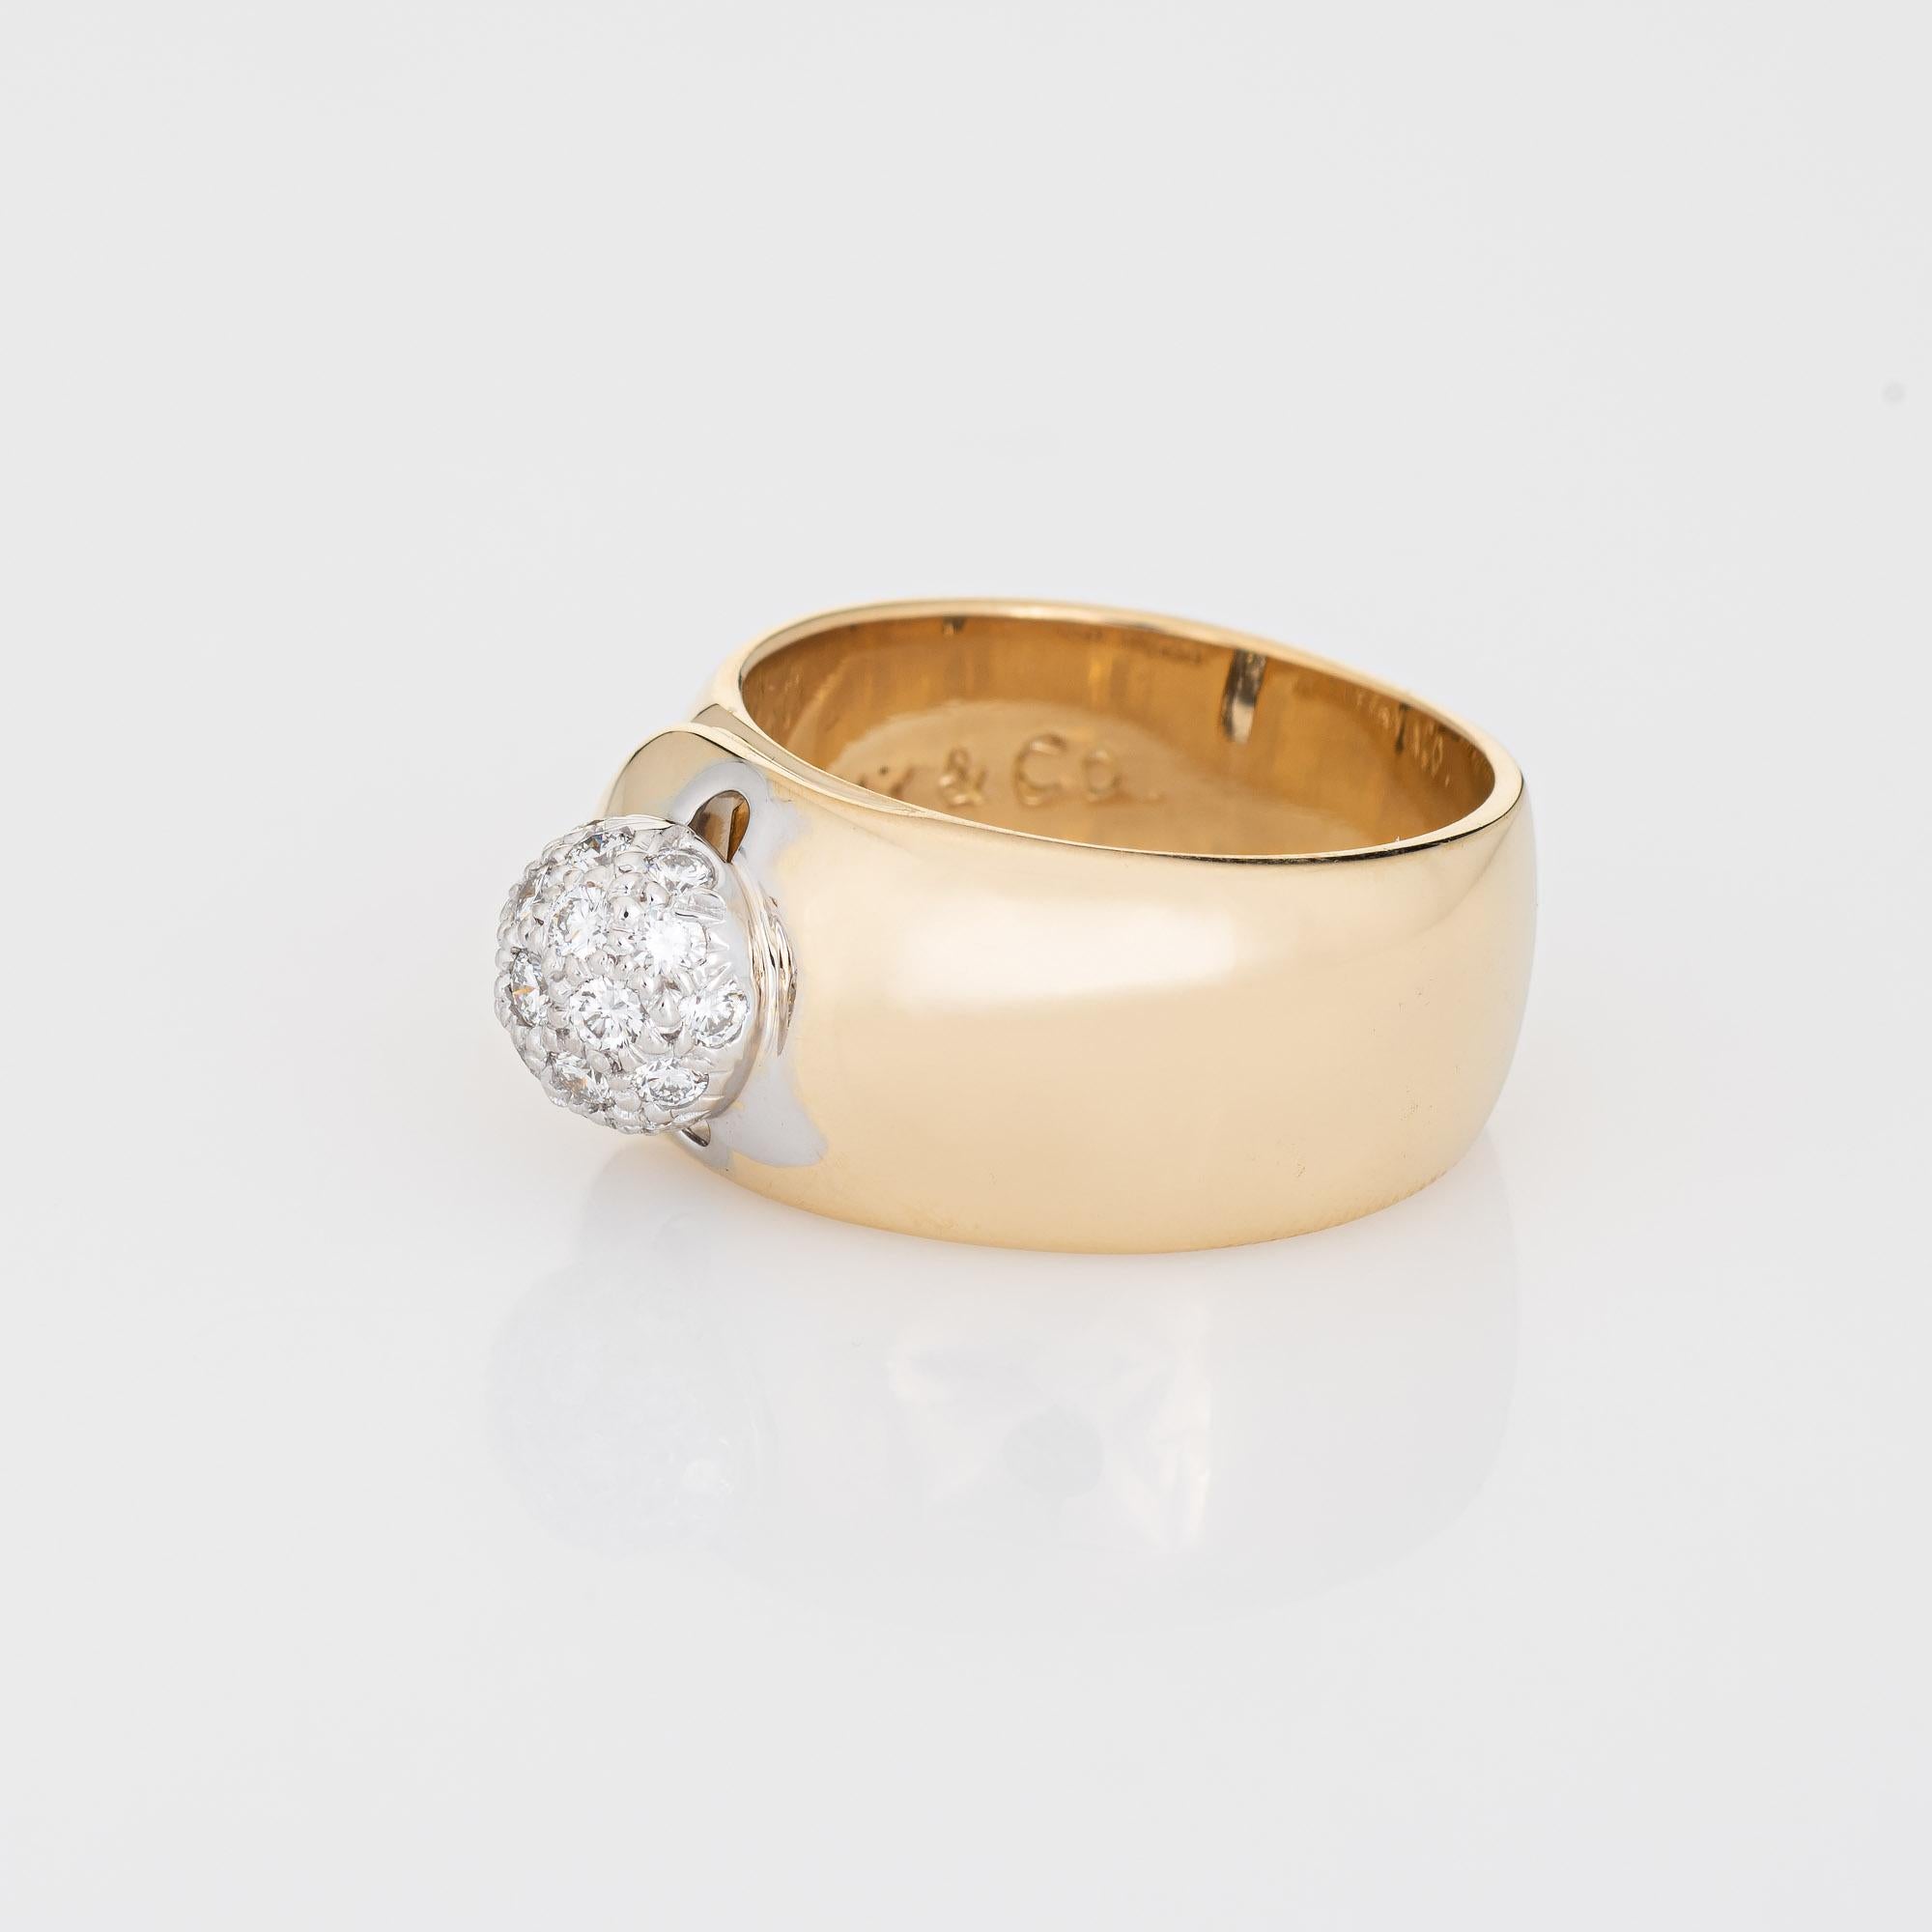 Taille ronde 1980 Tiffany & Co Diamond Ball Ring Picasso Vintage 18k Gold Wide Band 6.25 en vente